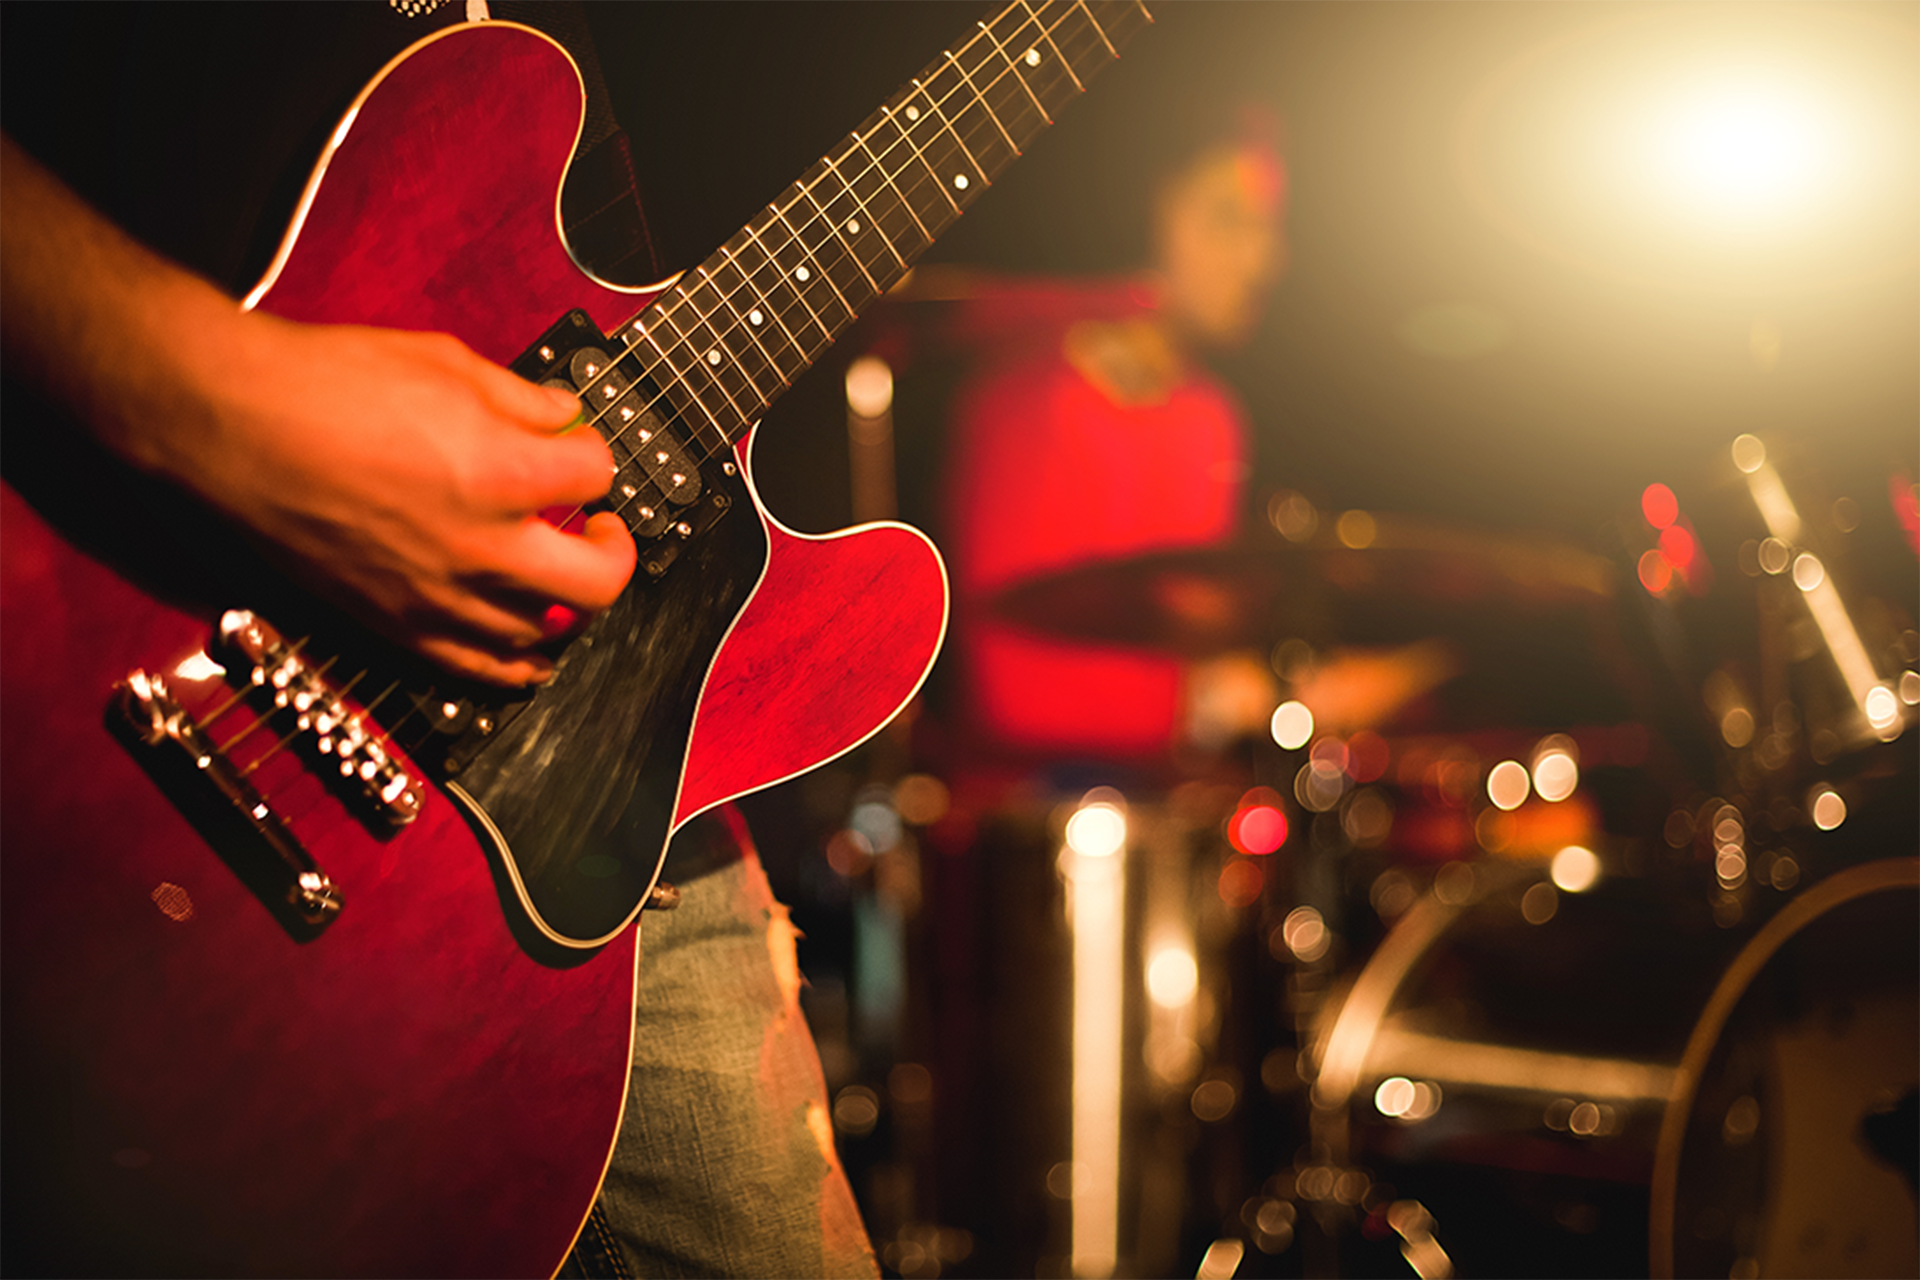 Got a great rock song? Enter it in our song contest to win cash prizes, licensing opportunities and more.